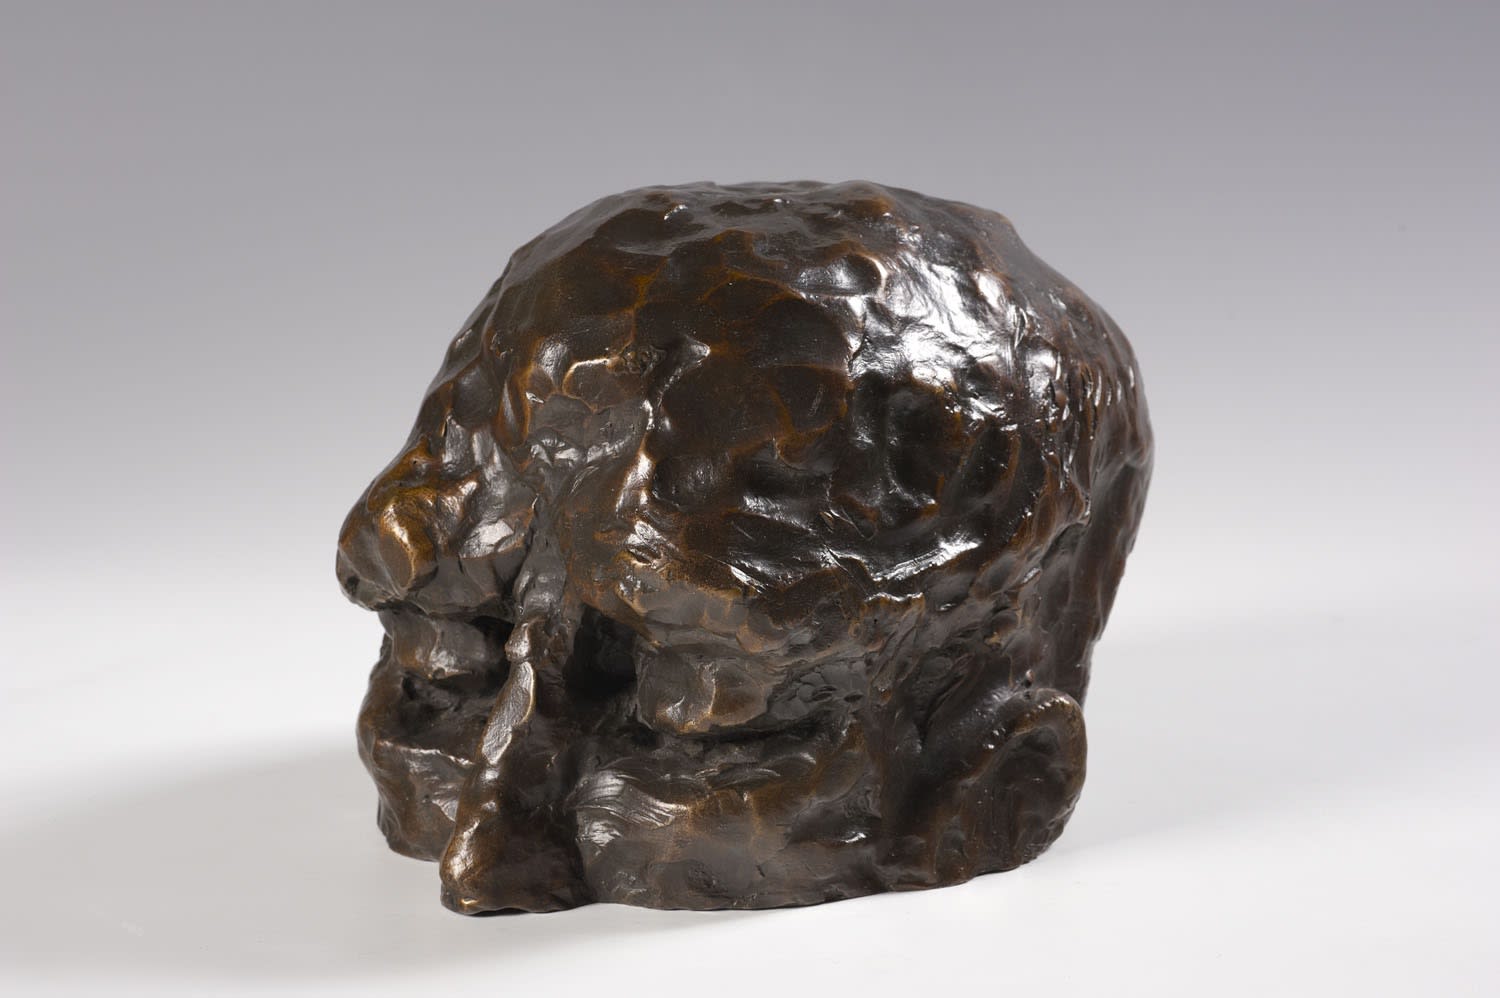 David Breuer-Weil (1965-) Maquette for Visitor 2010 Bronze with brown patina 18 × 17 × 23 cm Ben Uri Collection © David Breuer-Weil To see and discover more about this artist click here